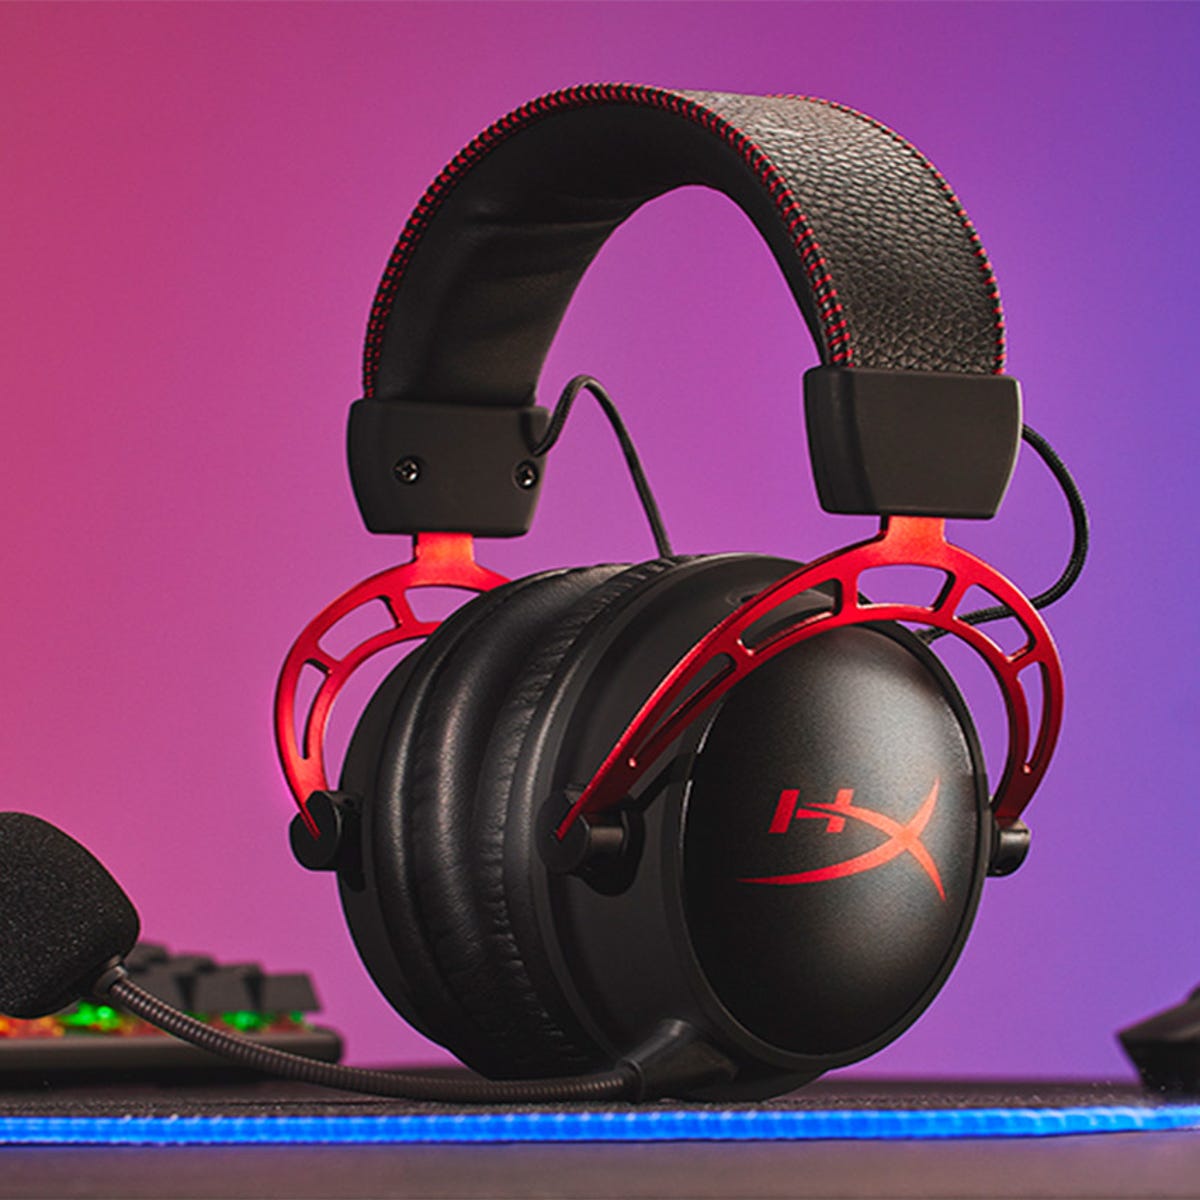 Refrein draadloos Buitenland HyperX Cloud Alpha Wireless review: Insanely great battery life for gaming,  music and more | ZDNET